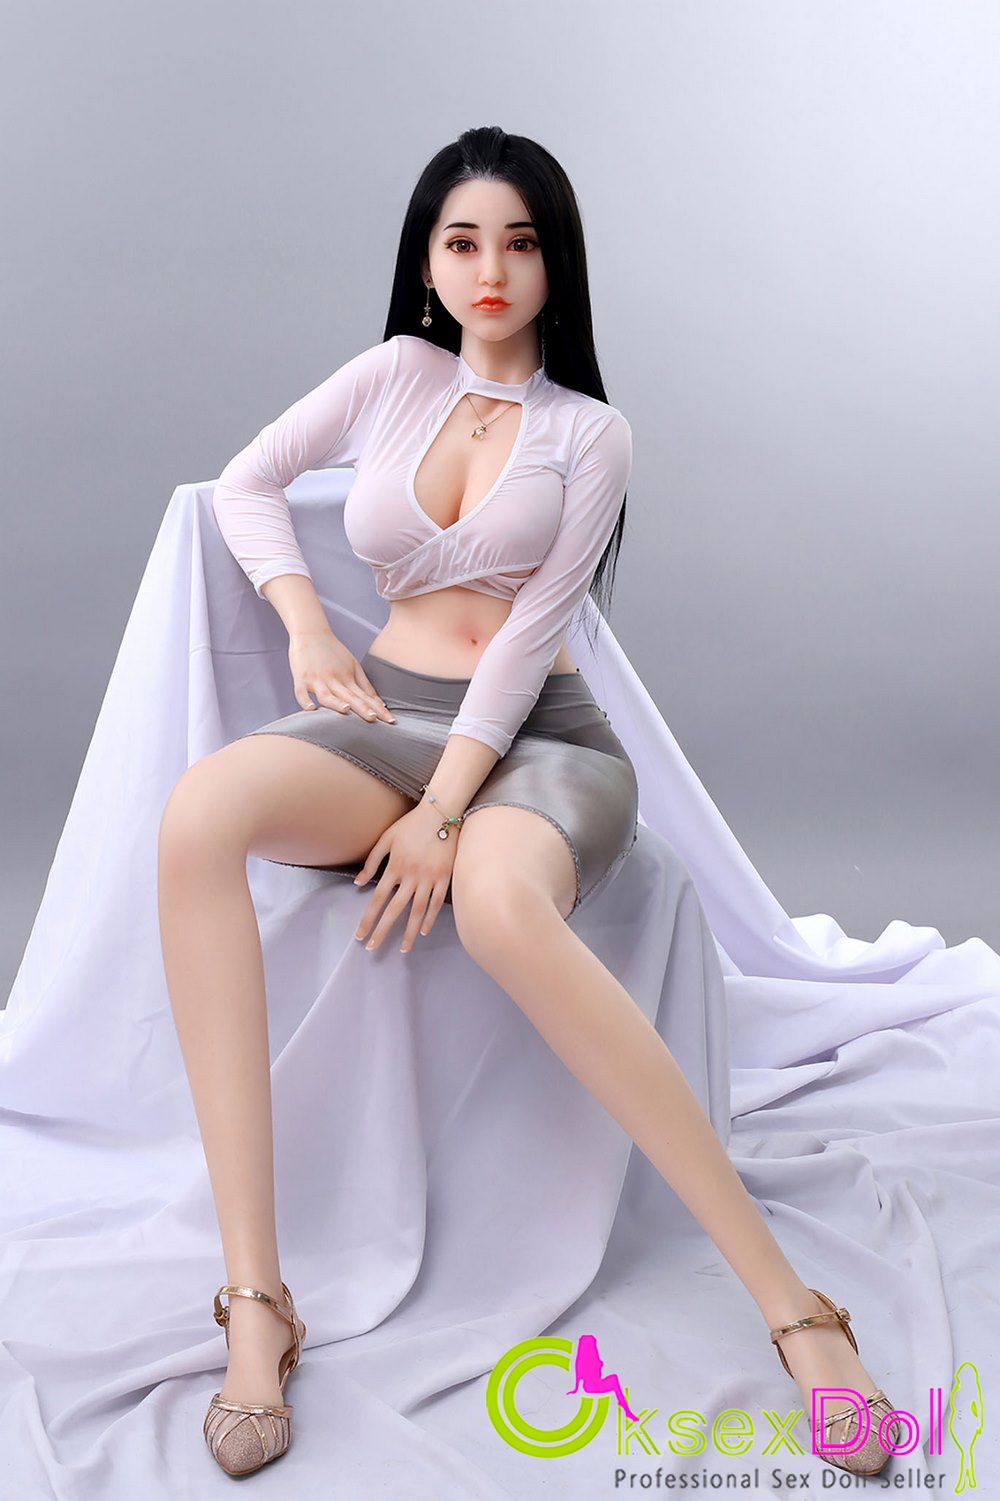 OkSexDoll C-cup Sex Dolls Pictures